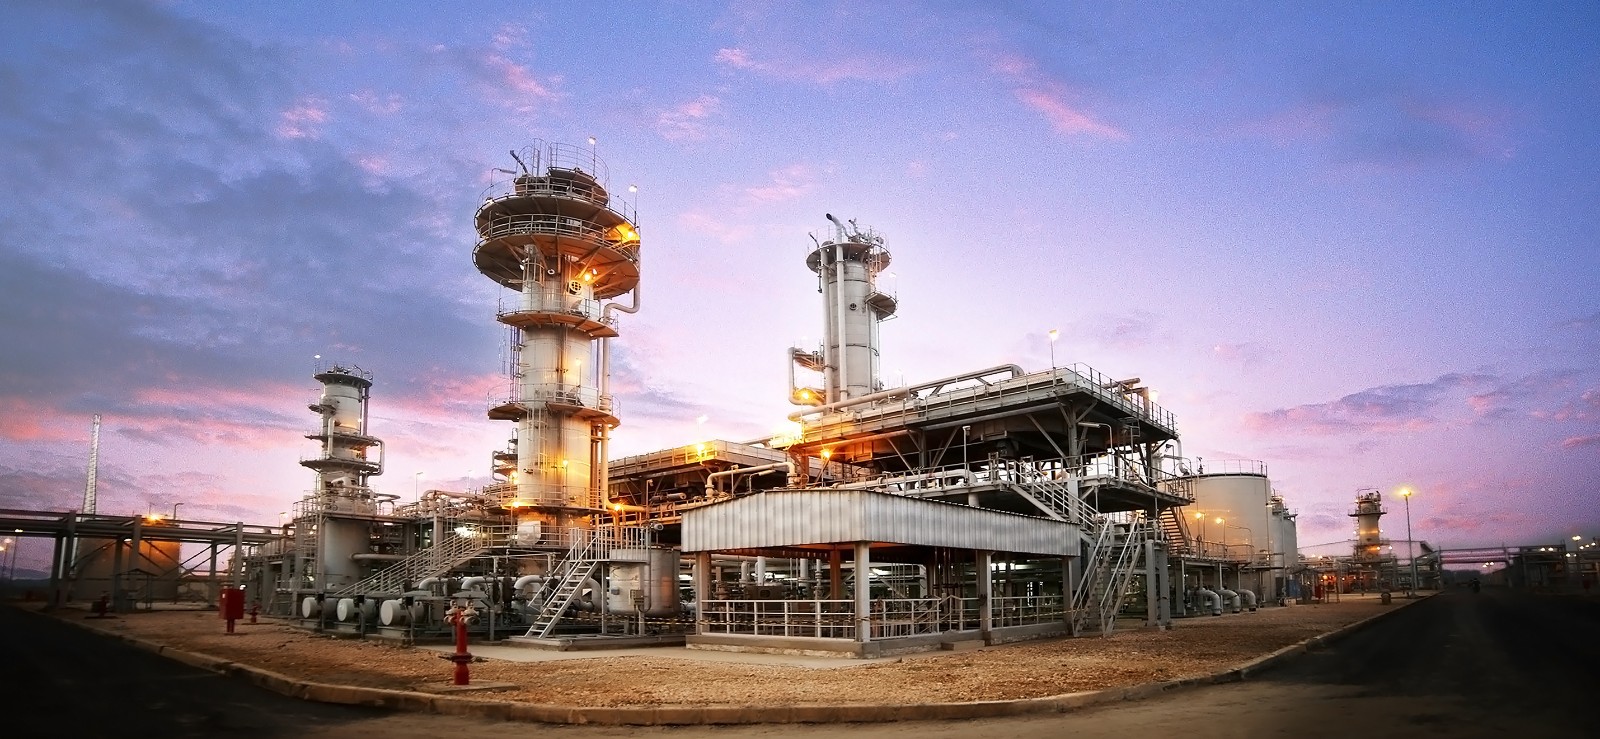 NATURAL GAS PROCESSING PLANT